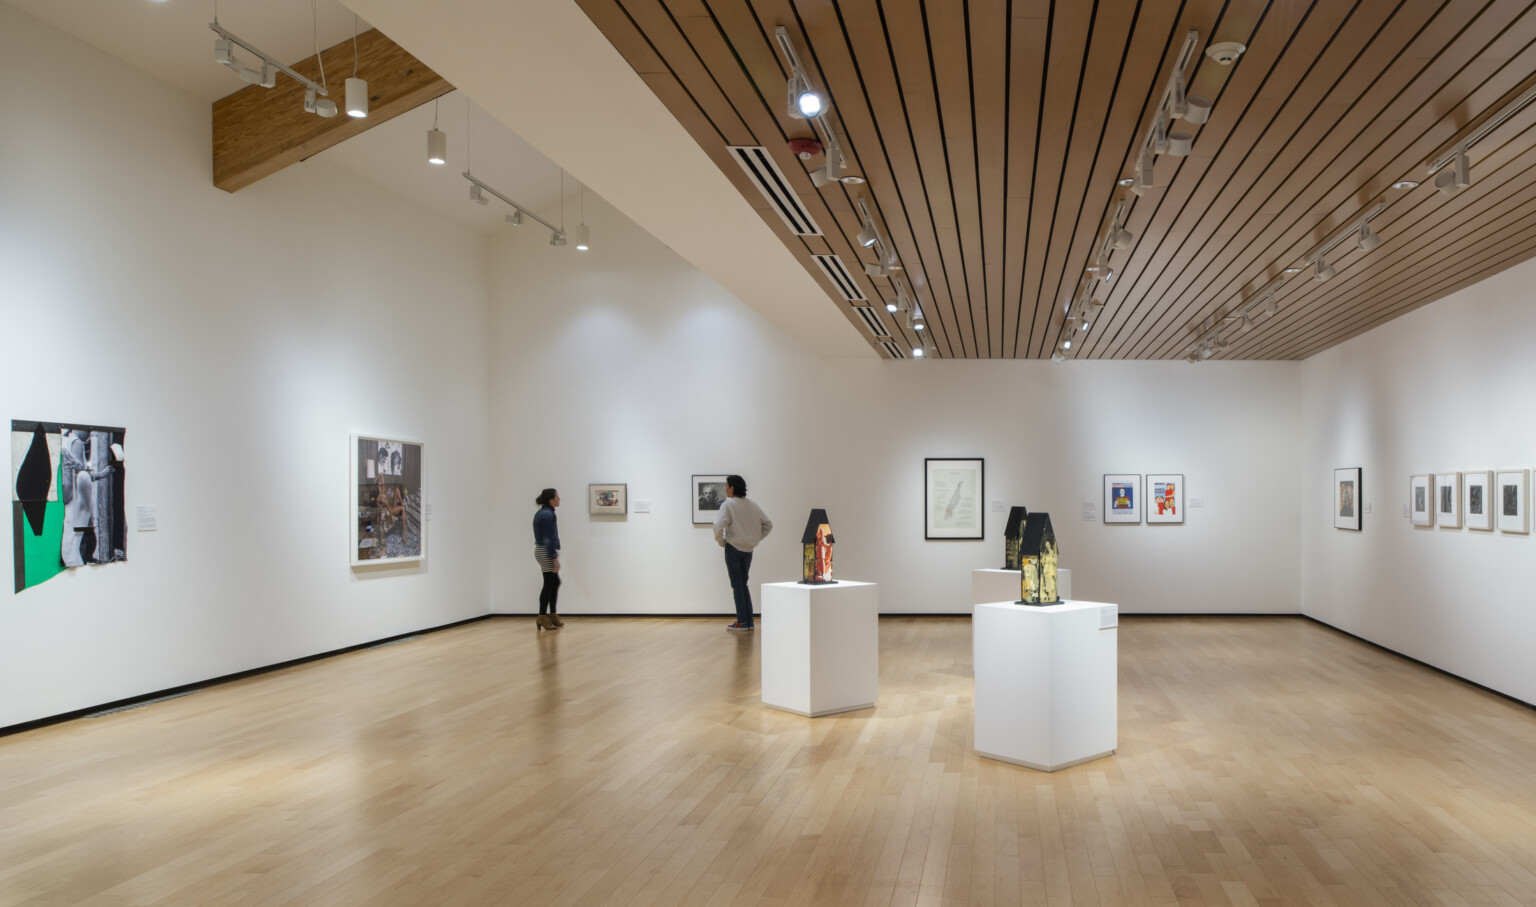 culture seekers view exhibit in performing arts center, timber paneled ceilings, overhead spotlights, gleaming hardwood floors, high-ceilings, hanging art on white walls, sculptures on modern pedestals of various sizes